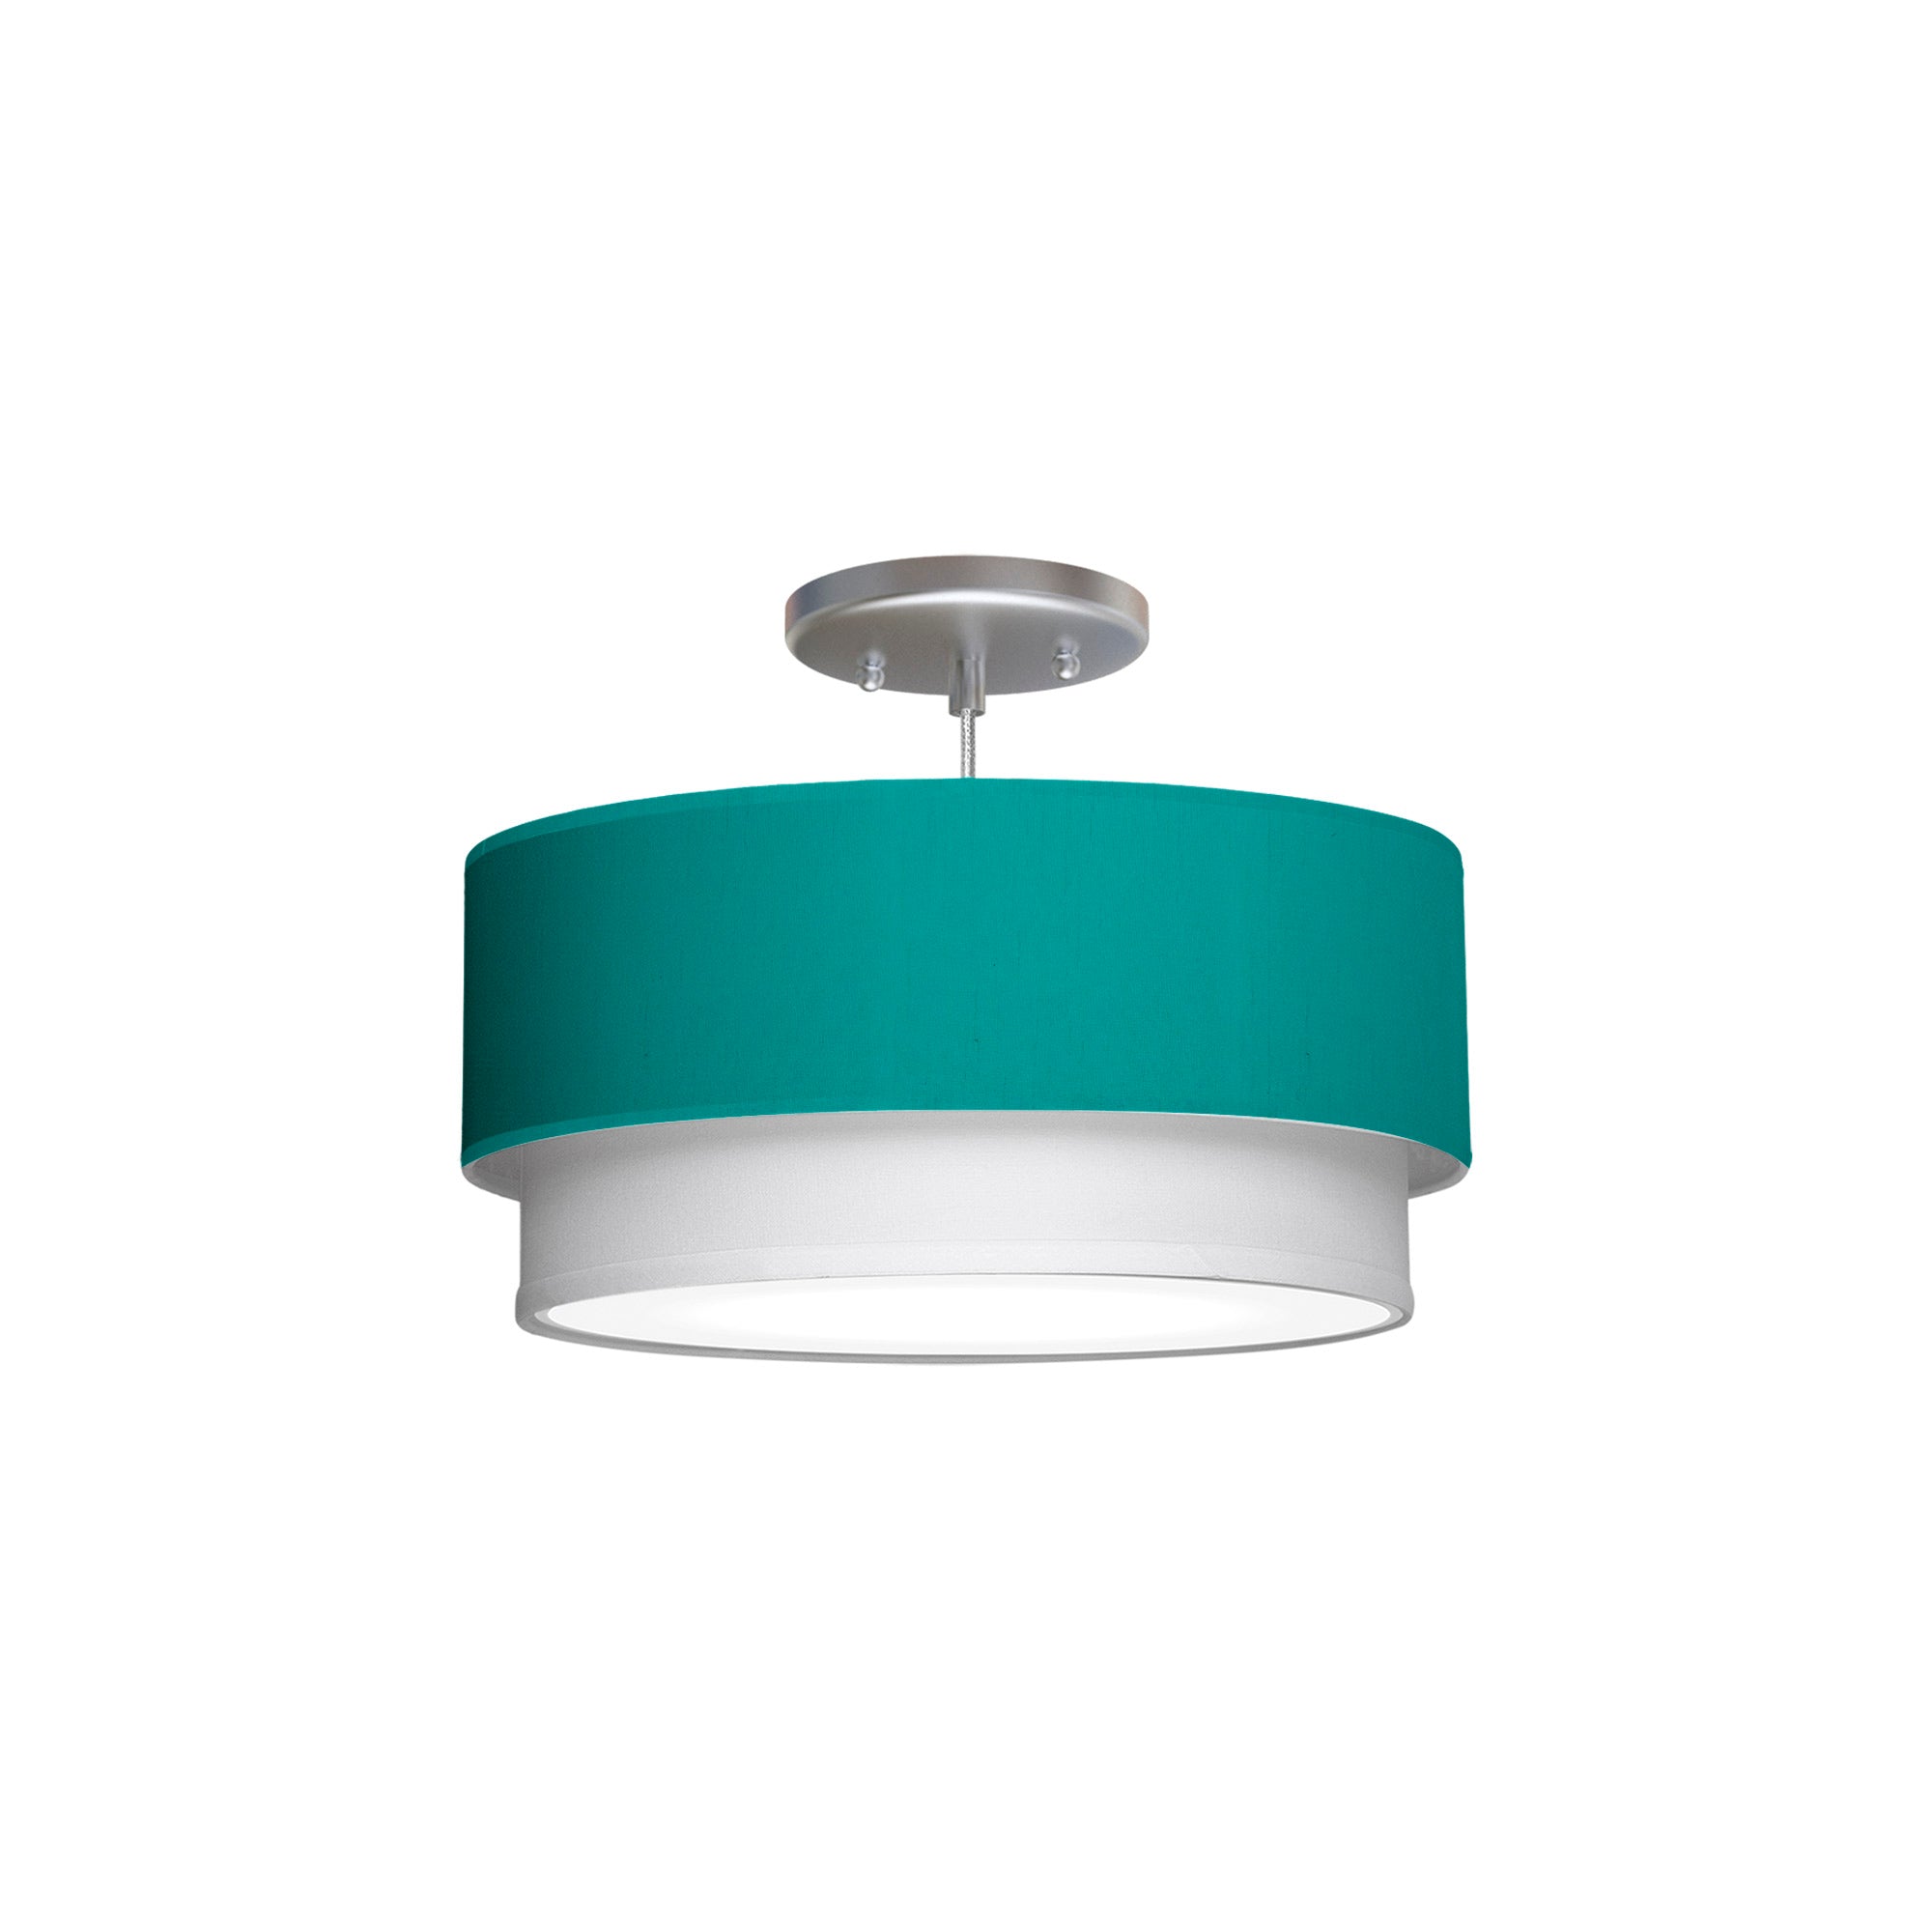 The Lenny Hanging Lamp from Seascape Fixtures with a silk shade in turquoise color.